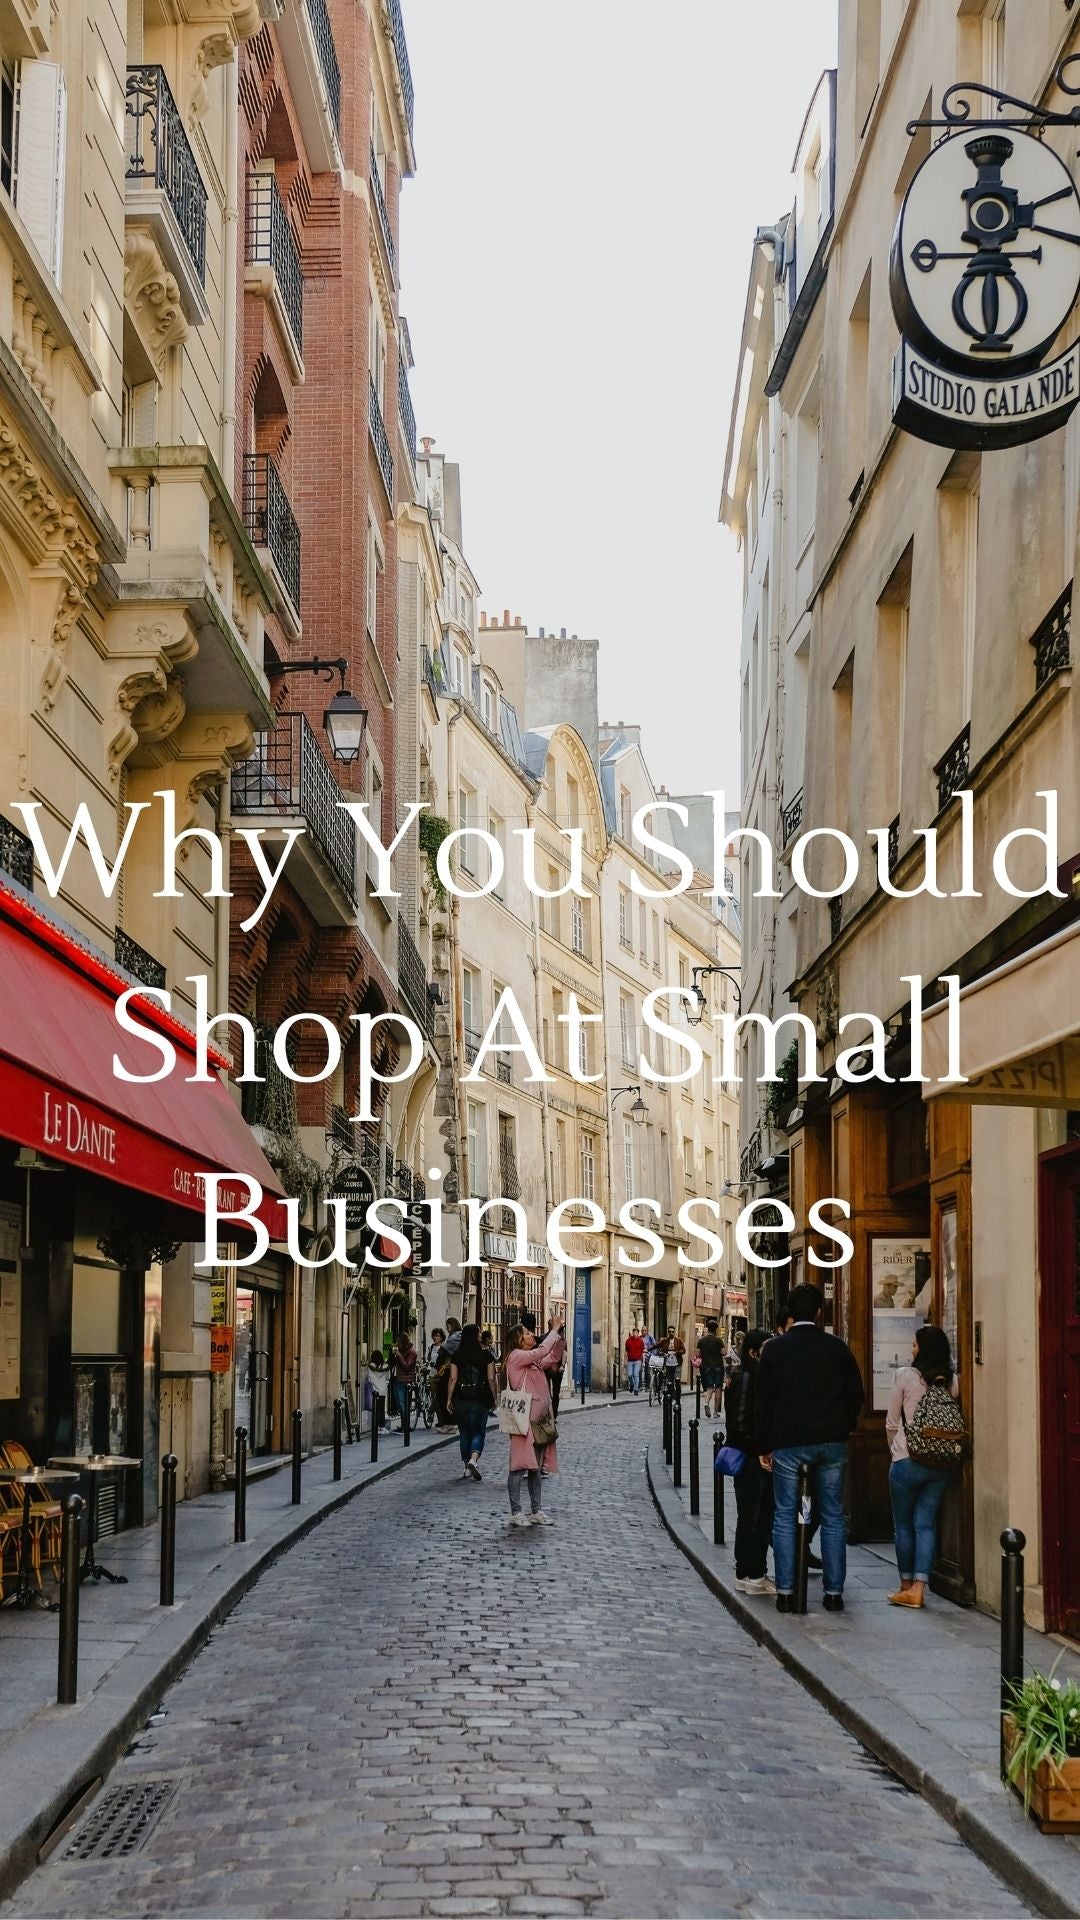 Why You Should Shop At Small Businesses - The Guilty Woman